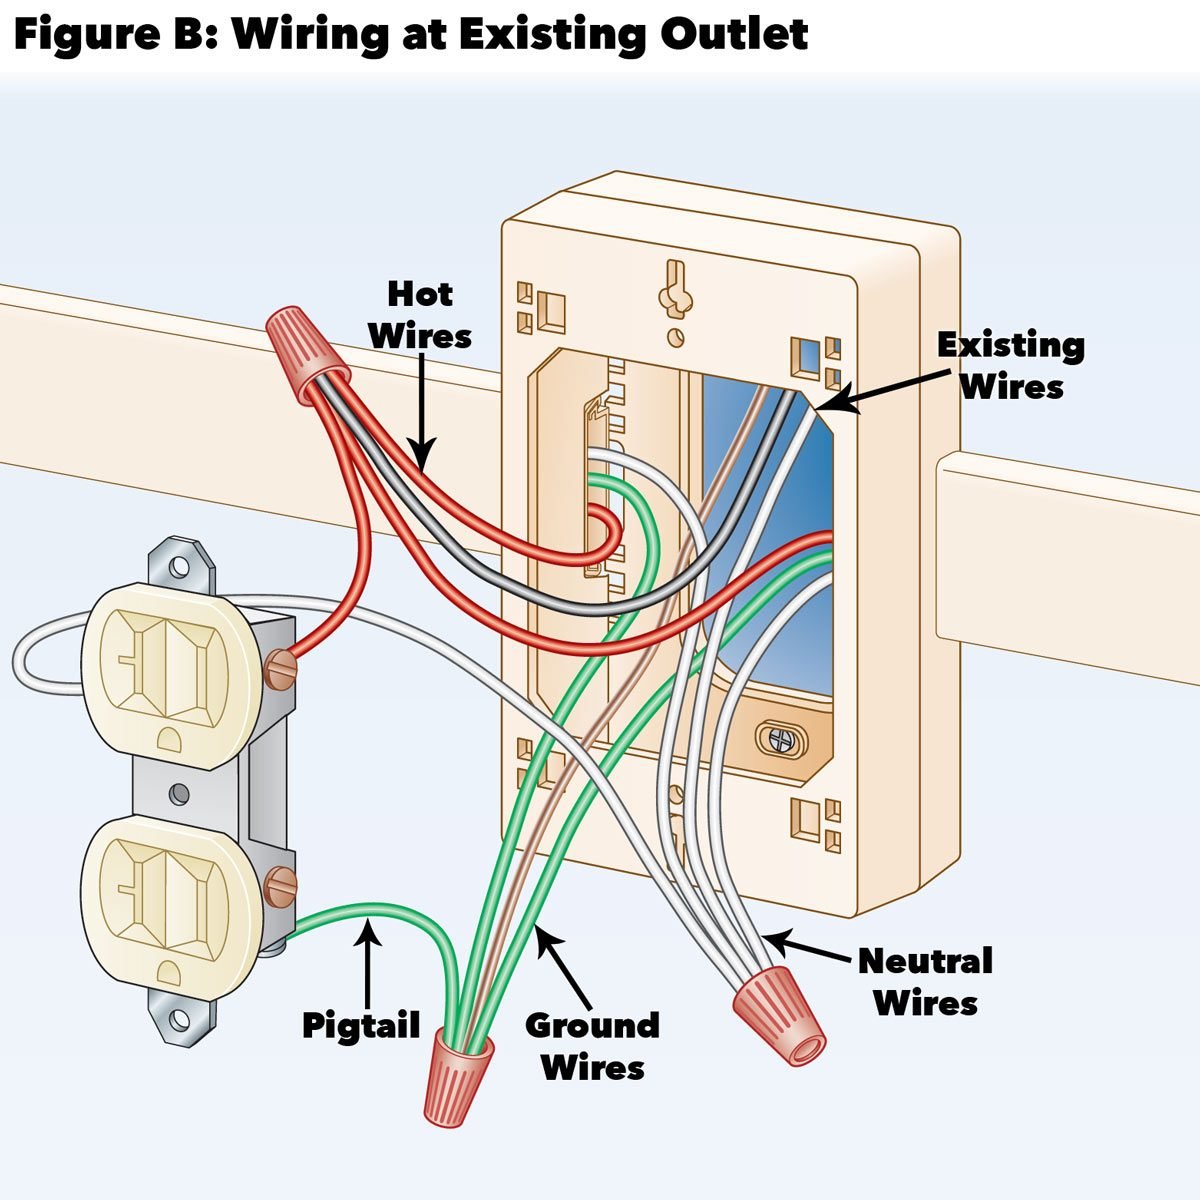 How to Make Pigtail Electrical Wire Connections